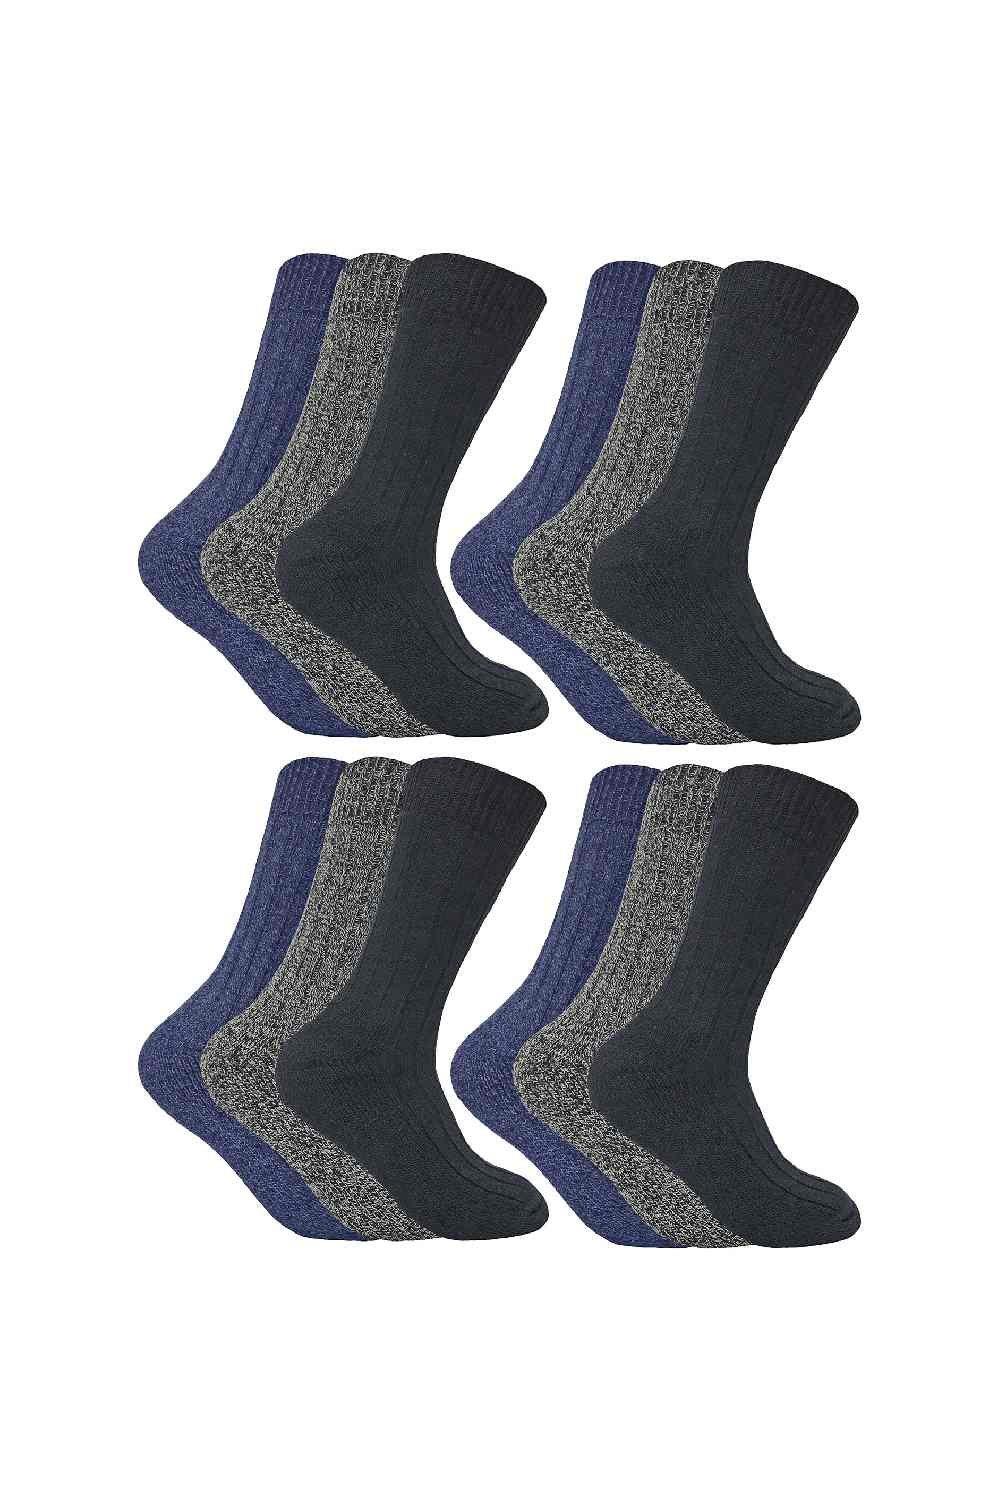 12 Pairs Wool Boot Socks for Hiking